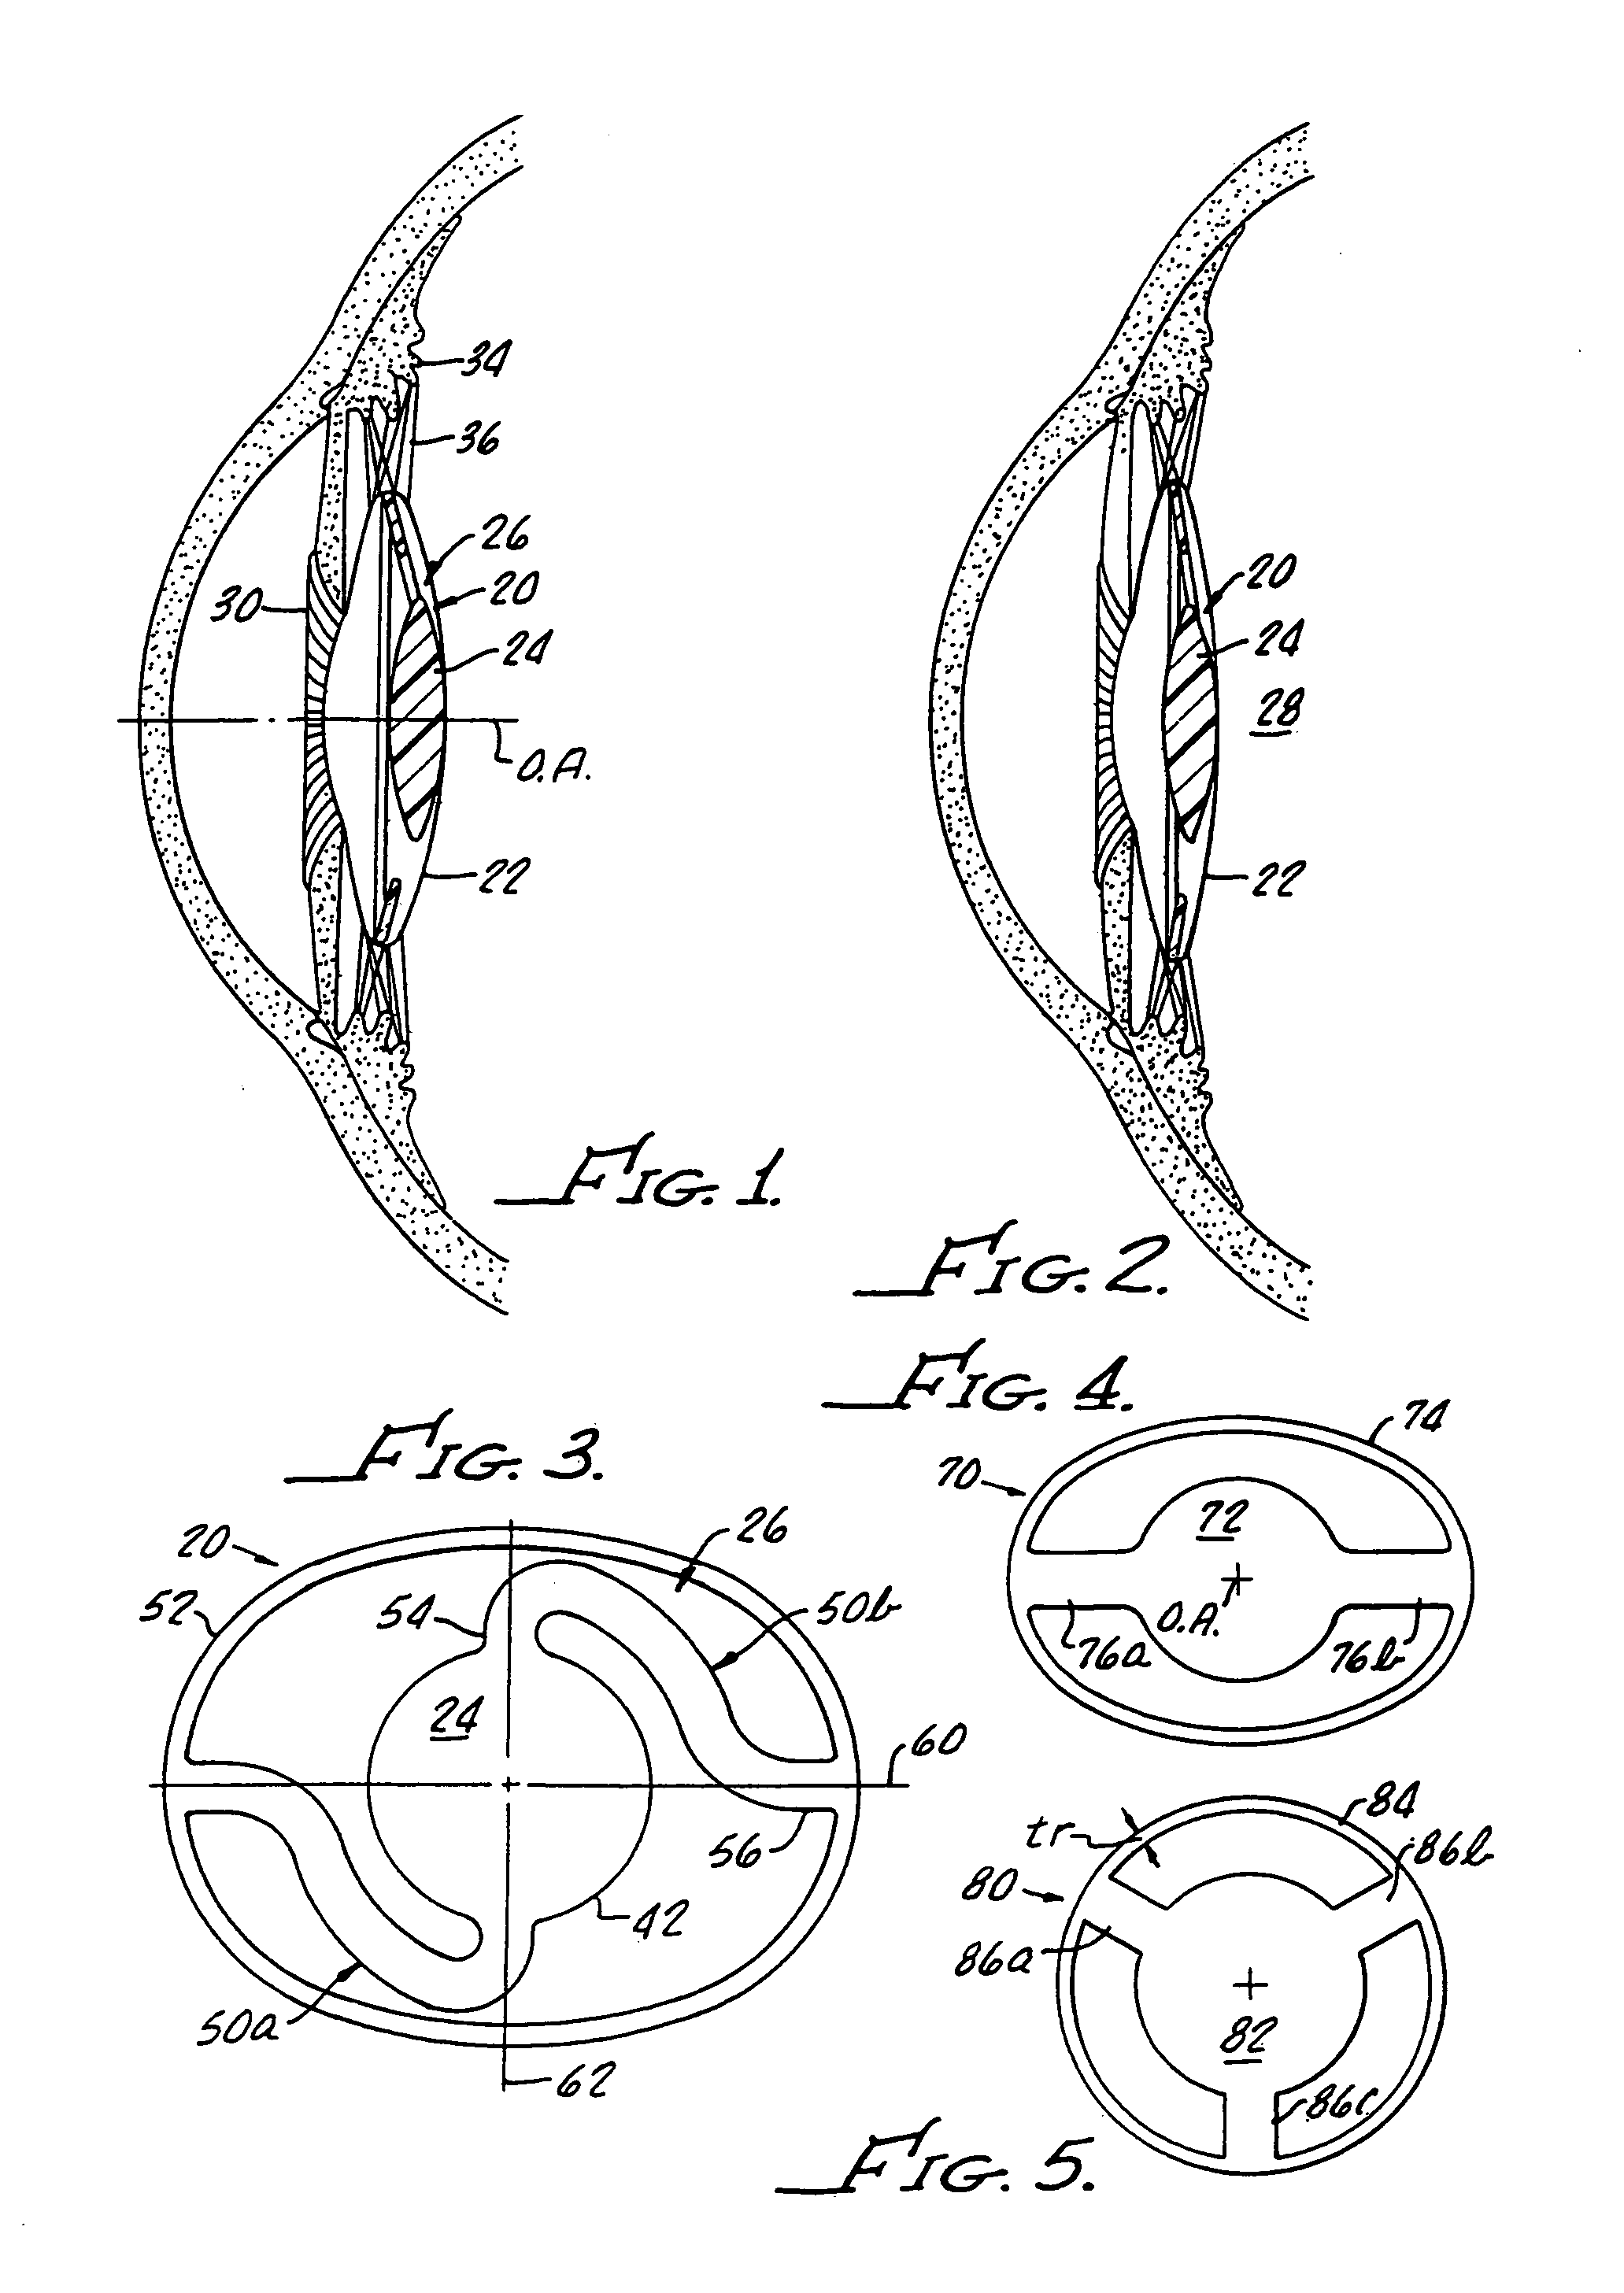 Accommodating intraocular lens with integral capsular bag ring